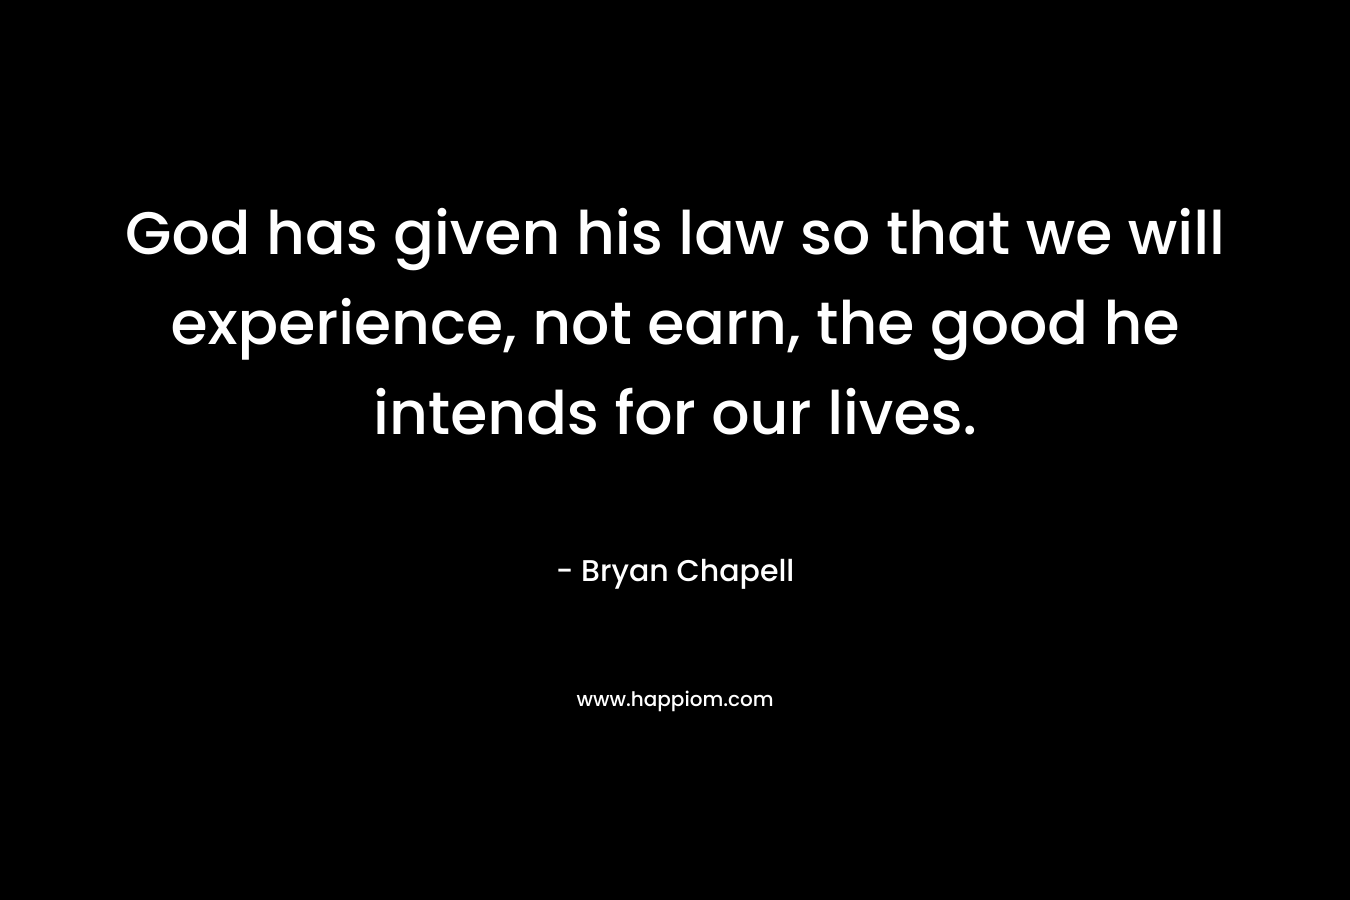 God has given his law so that we will experience, not earn, the good he intends for our lives. – Bryan Chapell